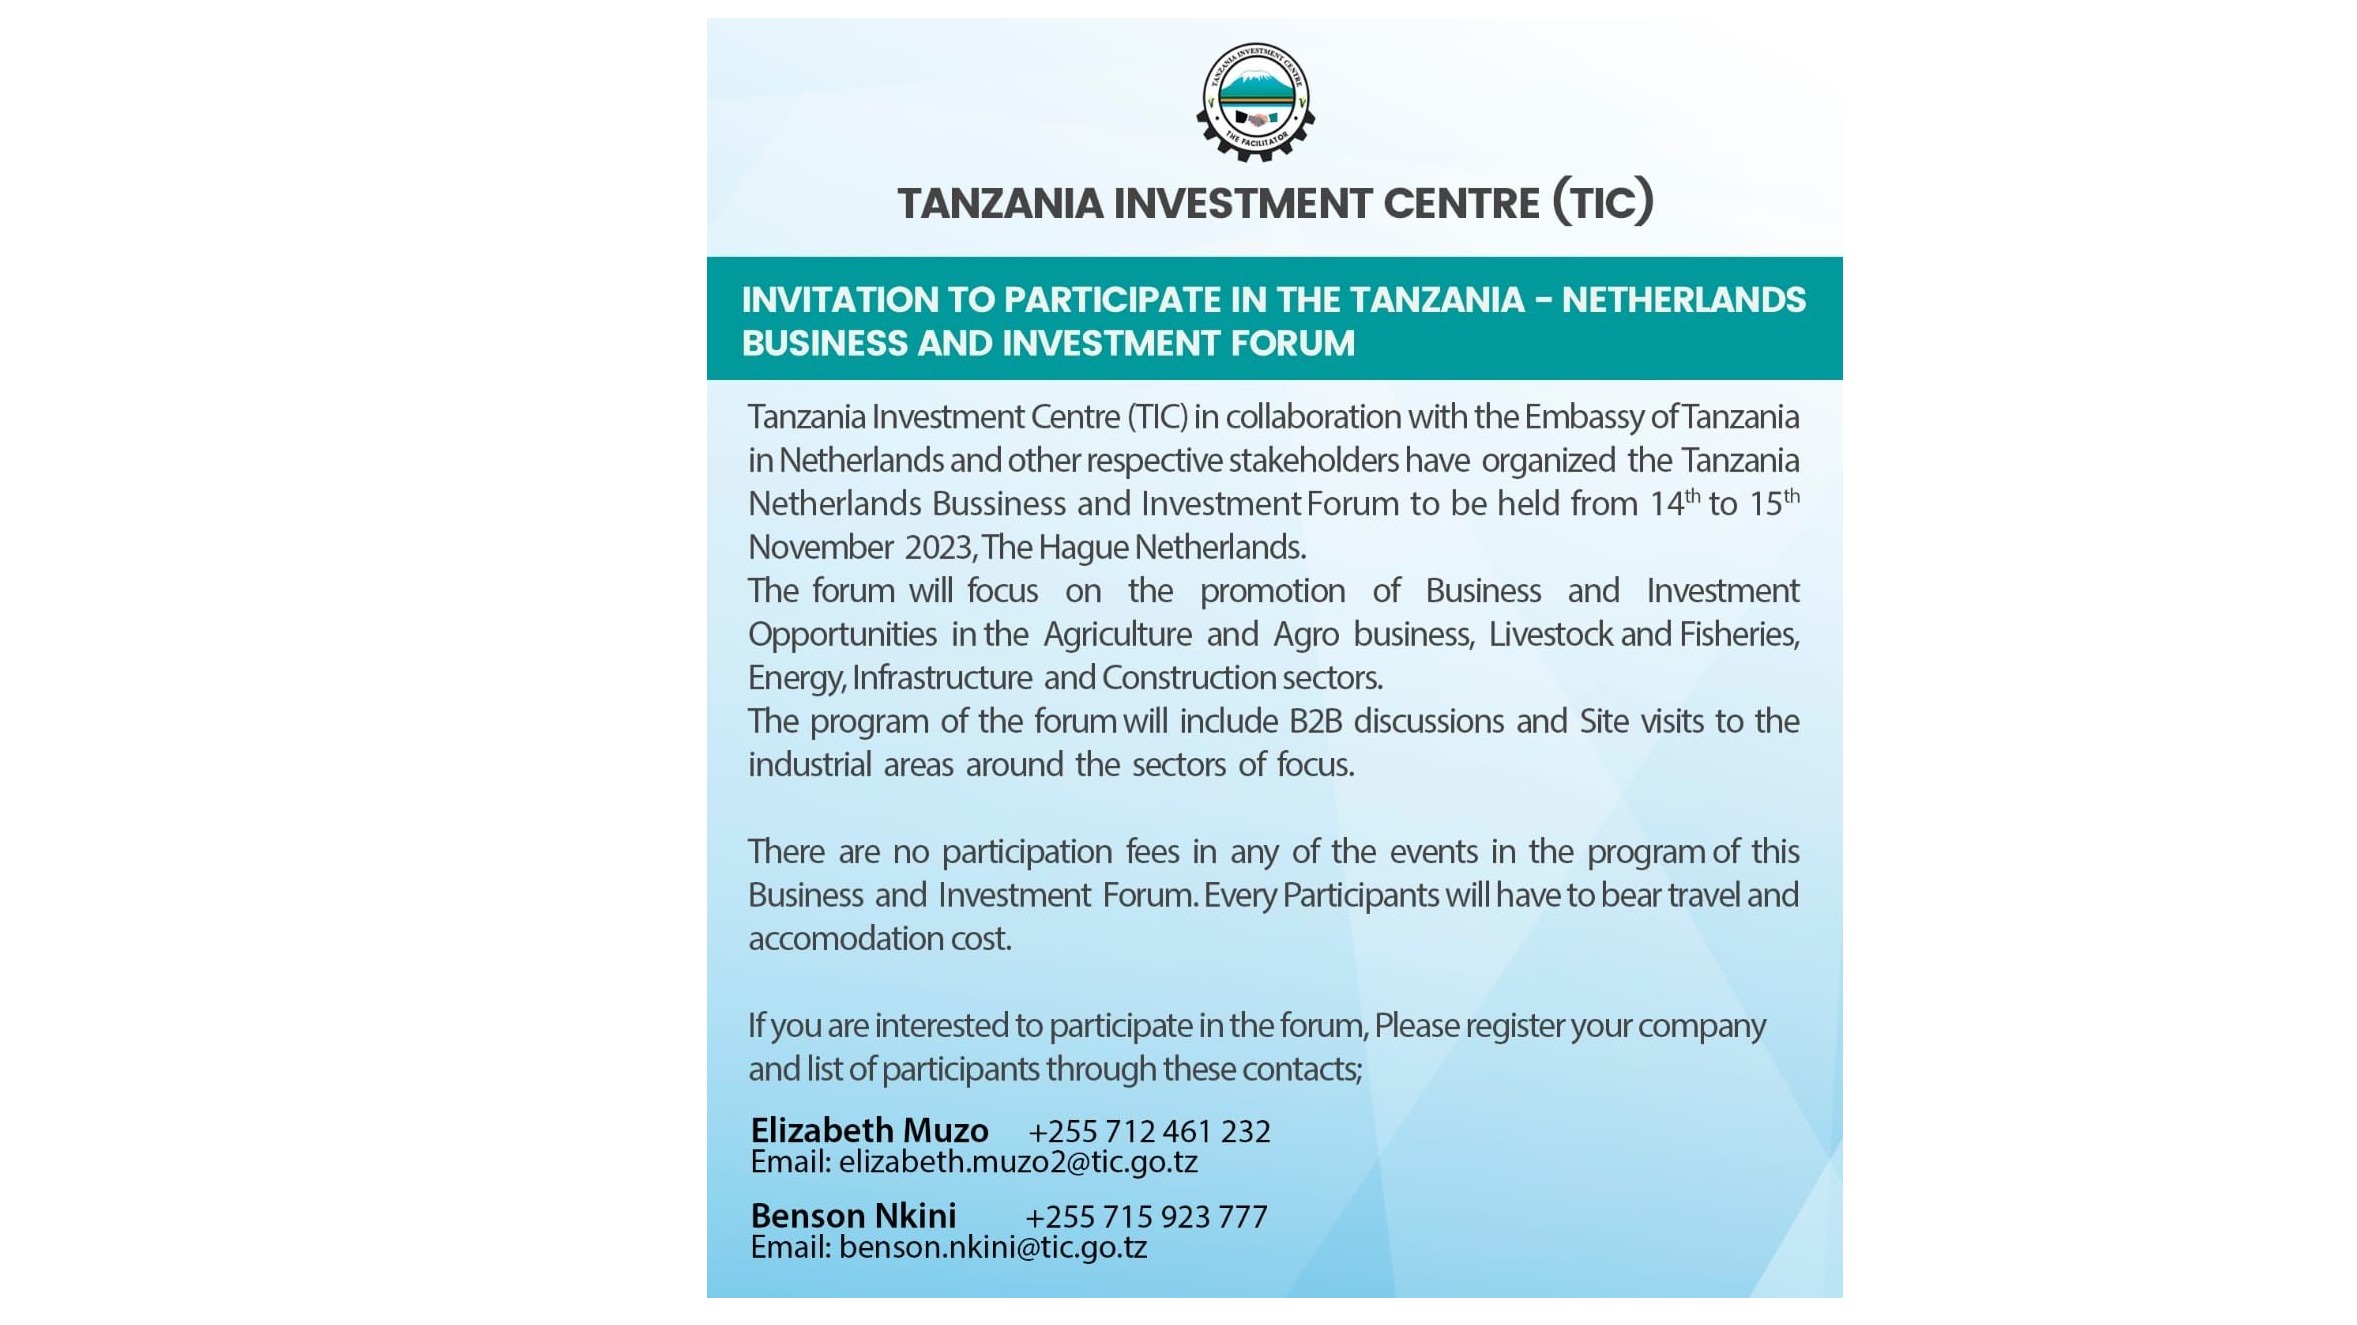 THE INVITATION TO PARTICIPATE IN THE TANZANIA-NETHERLANDS BUSINESS AND INVESTMENT FORUM